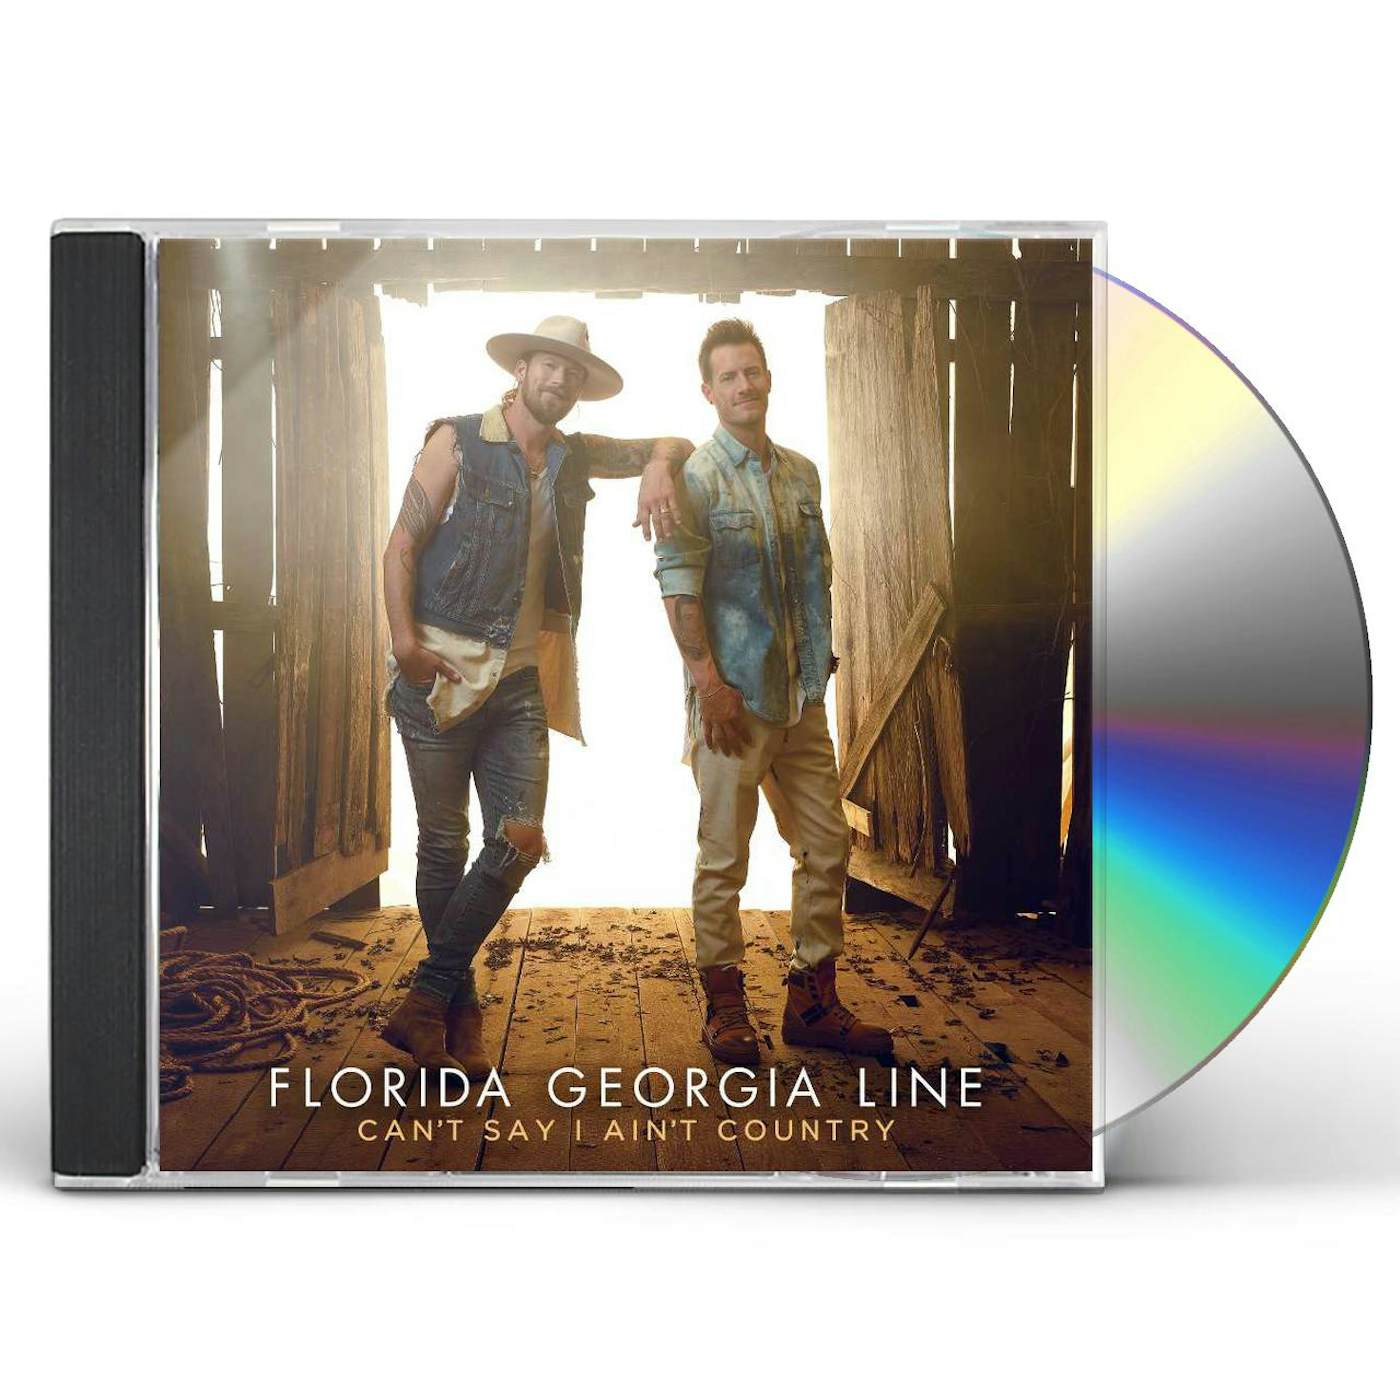 Florida Georgia Line CAN'T SAY I AIN'T COUNTRY CD